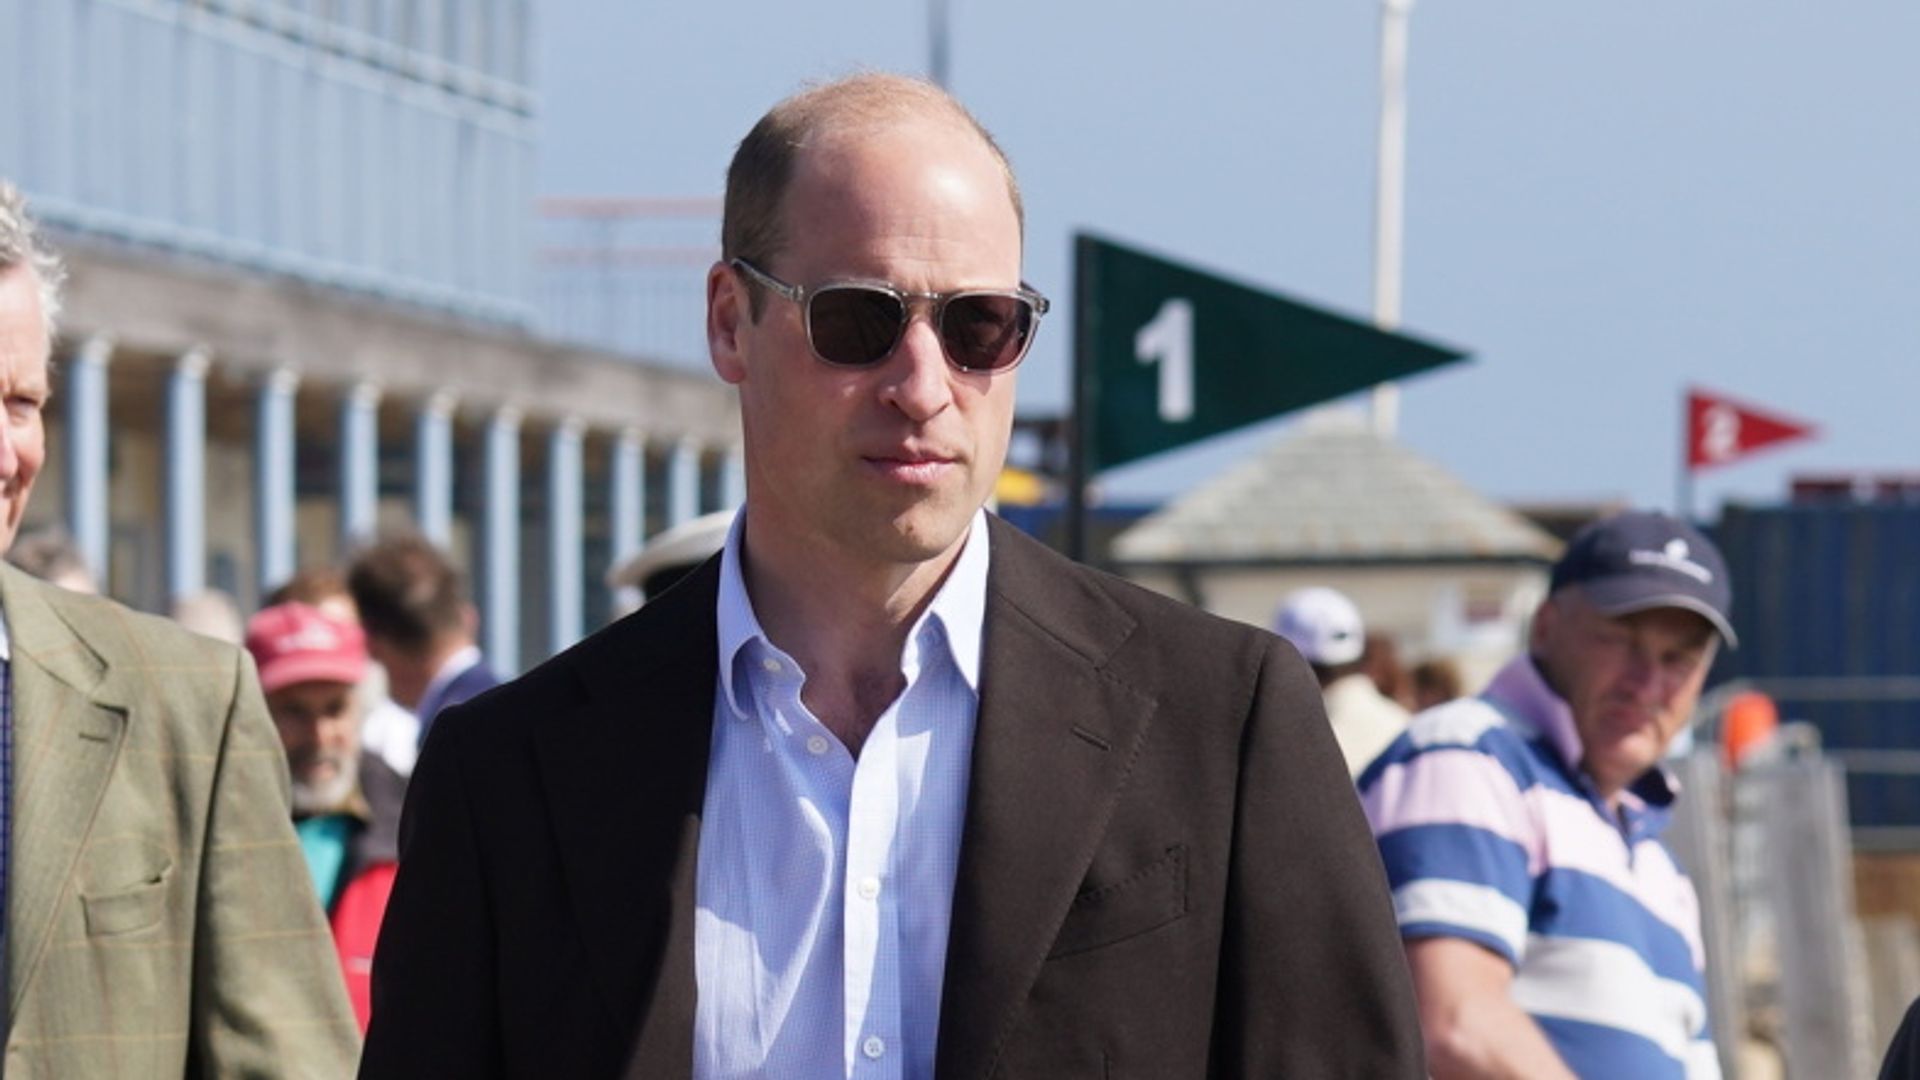 William gives update on Kate after cancer diagnosis